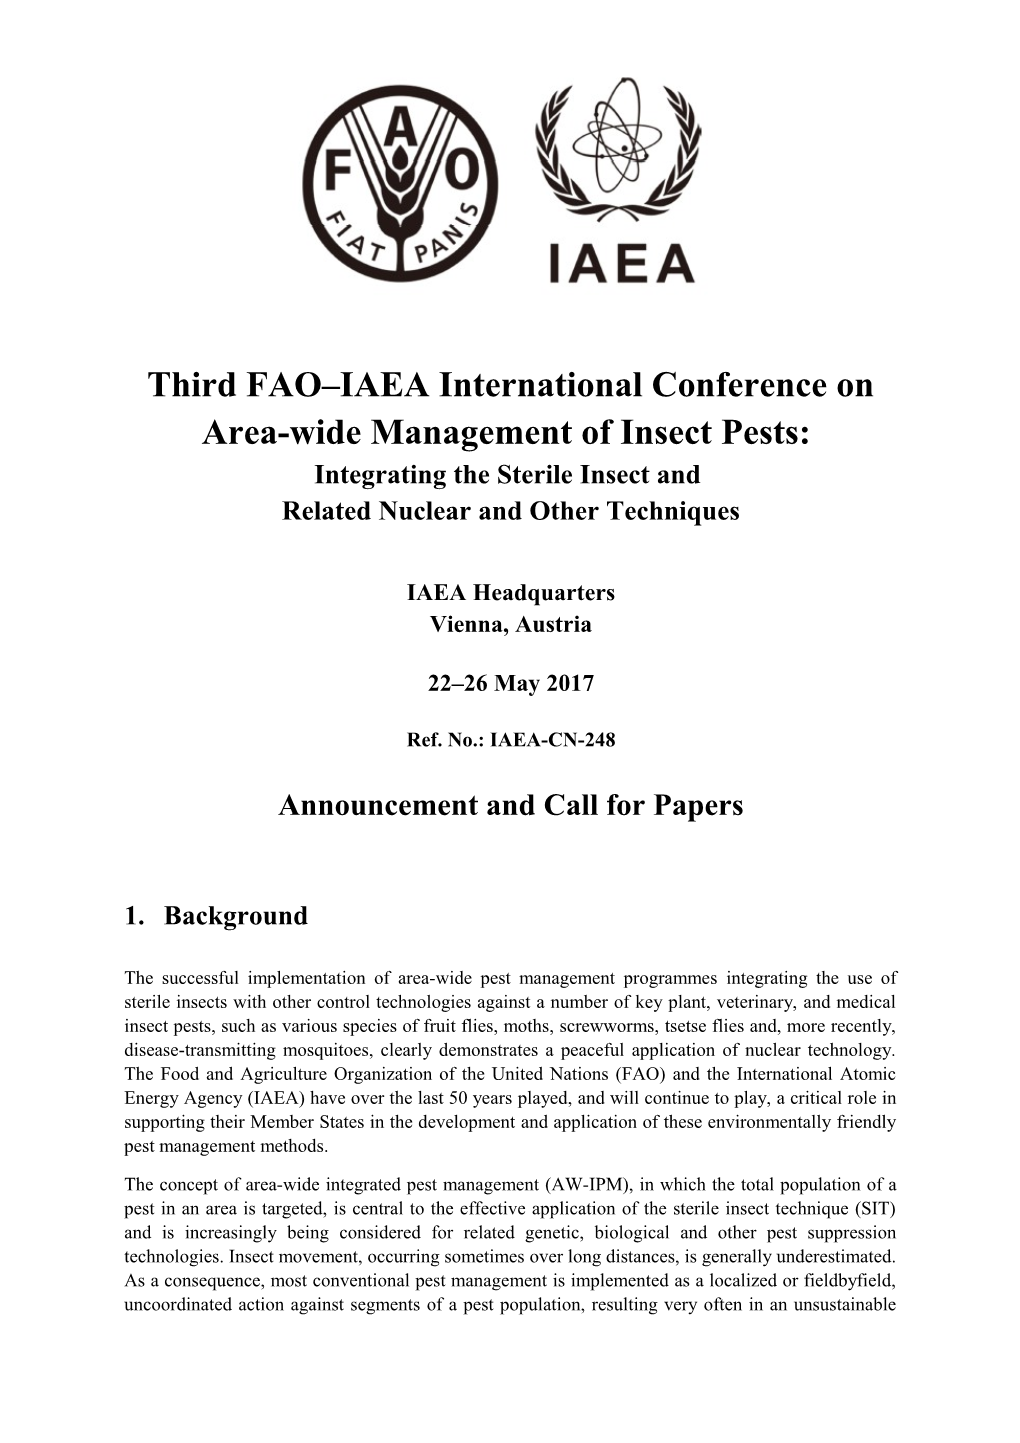 Third FAO IAEA International Conference on Area-Wide Managementof Insect Pests